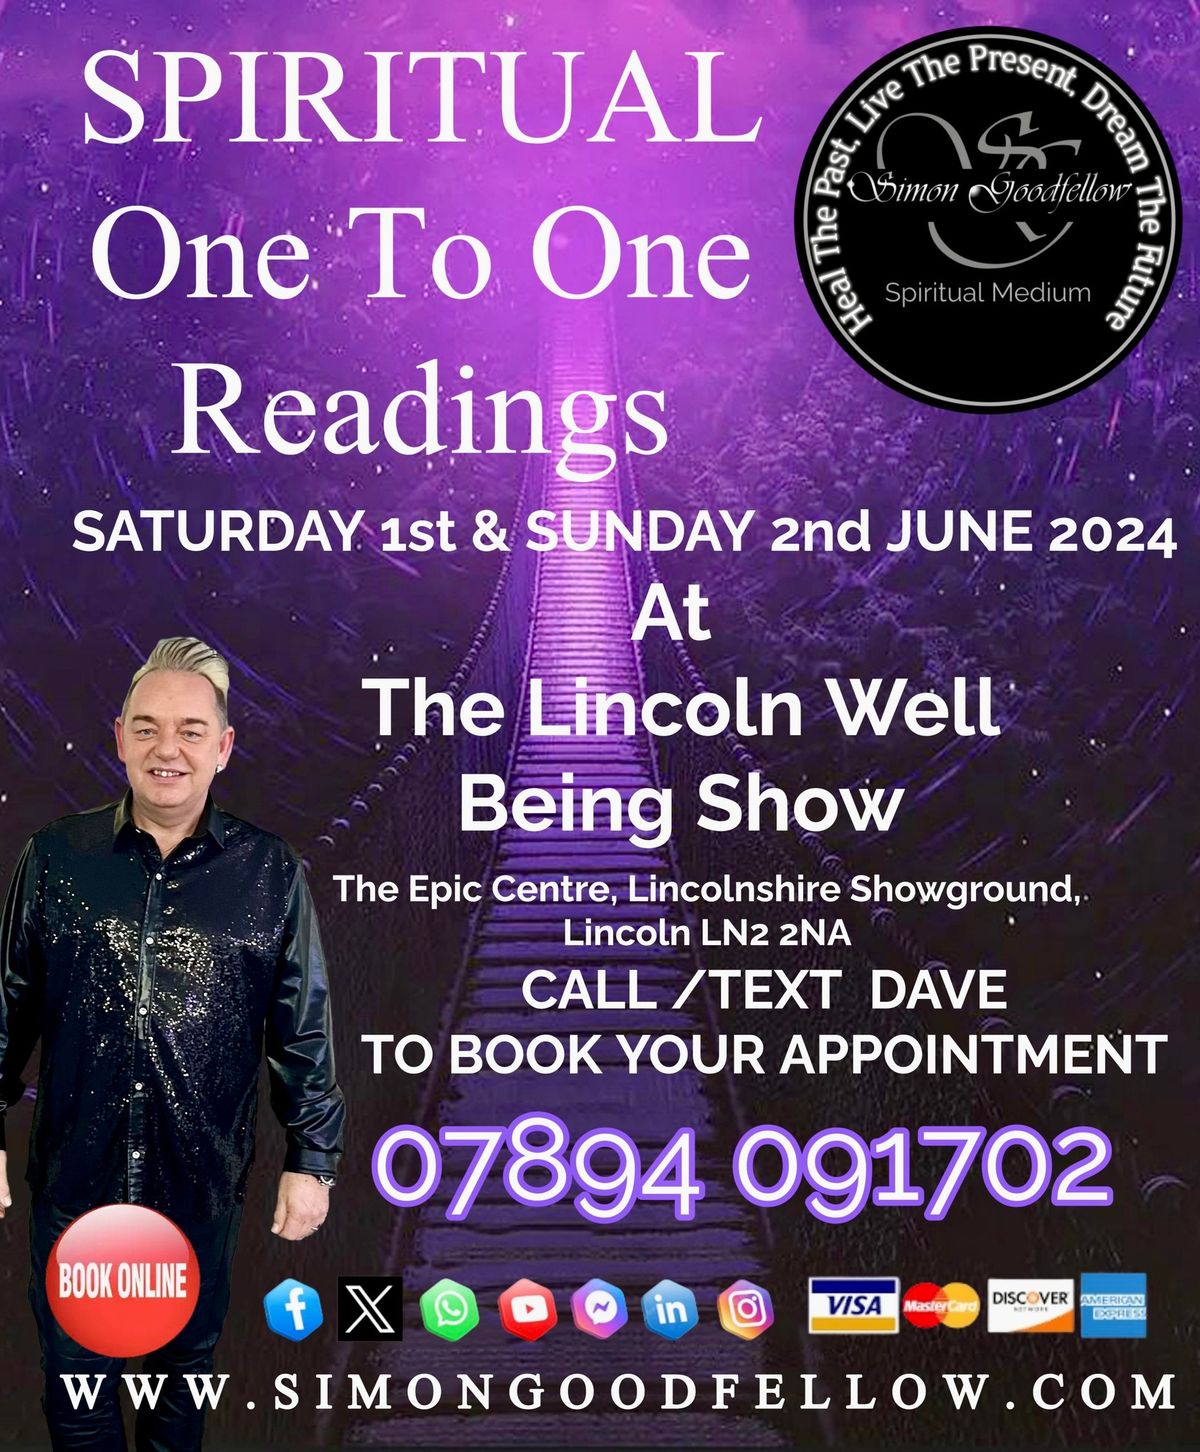 Book your 1-2-1 Reading back at Lincoln Well Being Show this June 